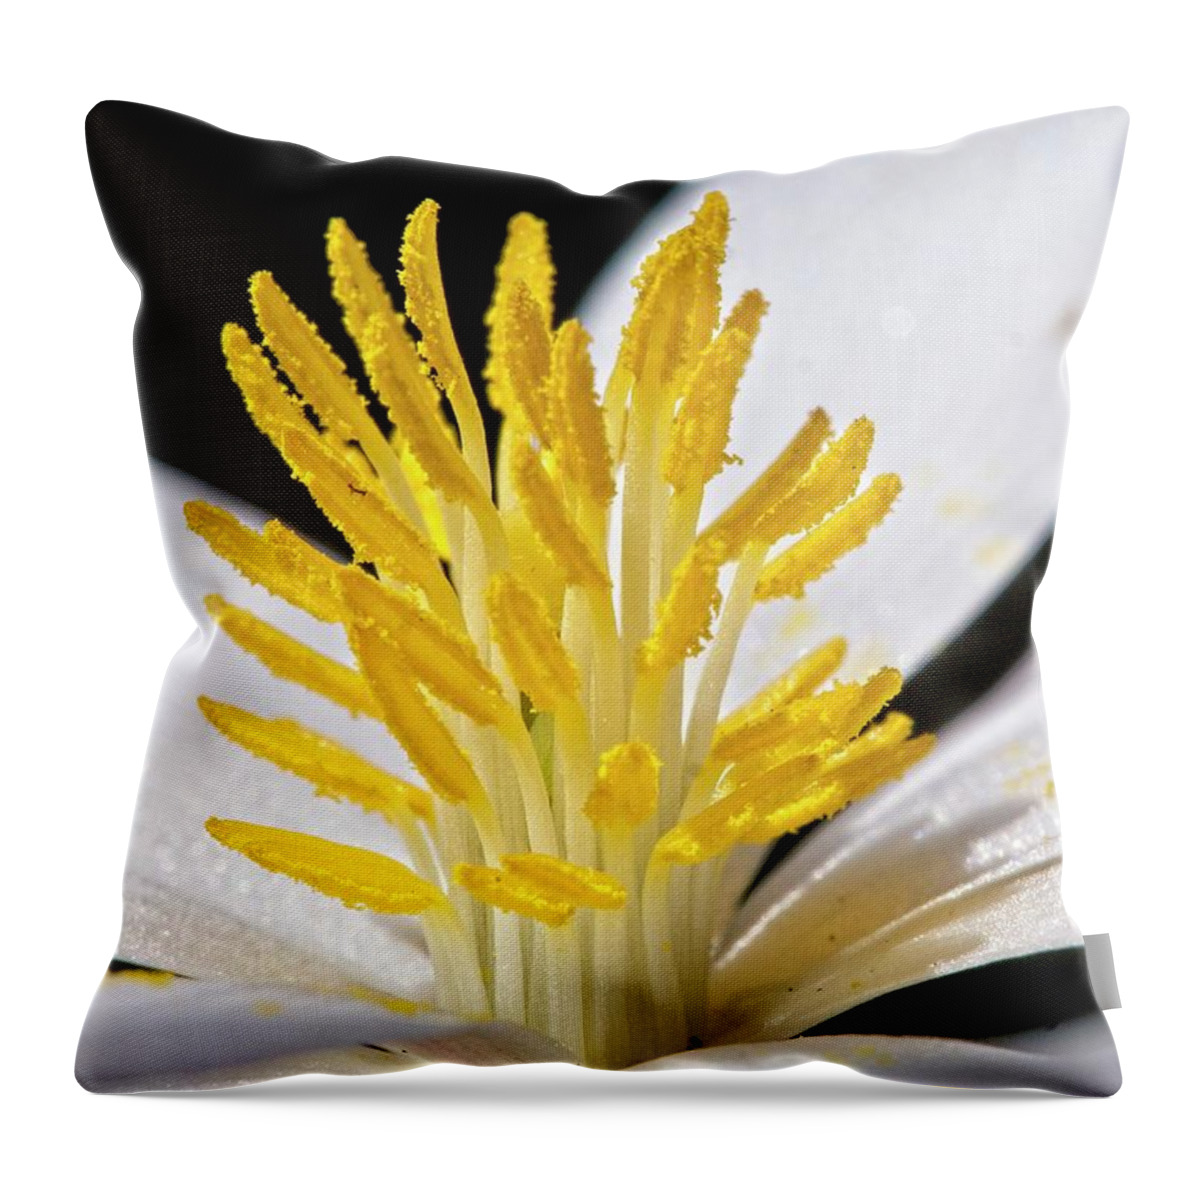 Flowers Throw Pillow featuring the photograph Bloodroot 9 by Steven Ralser